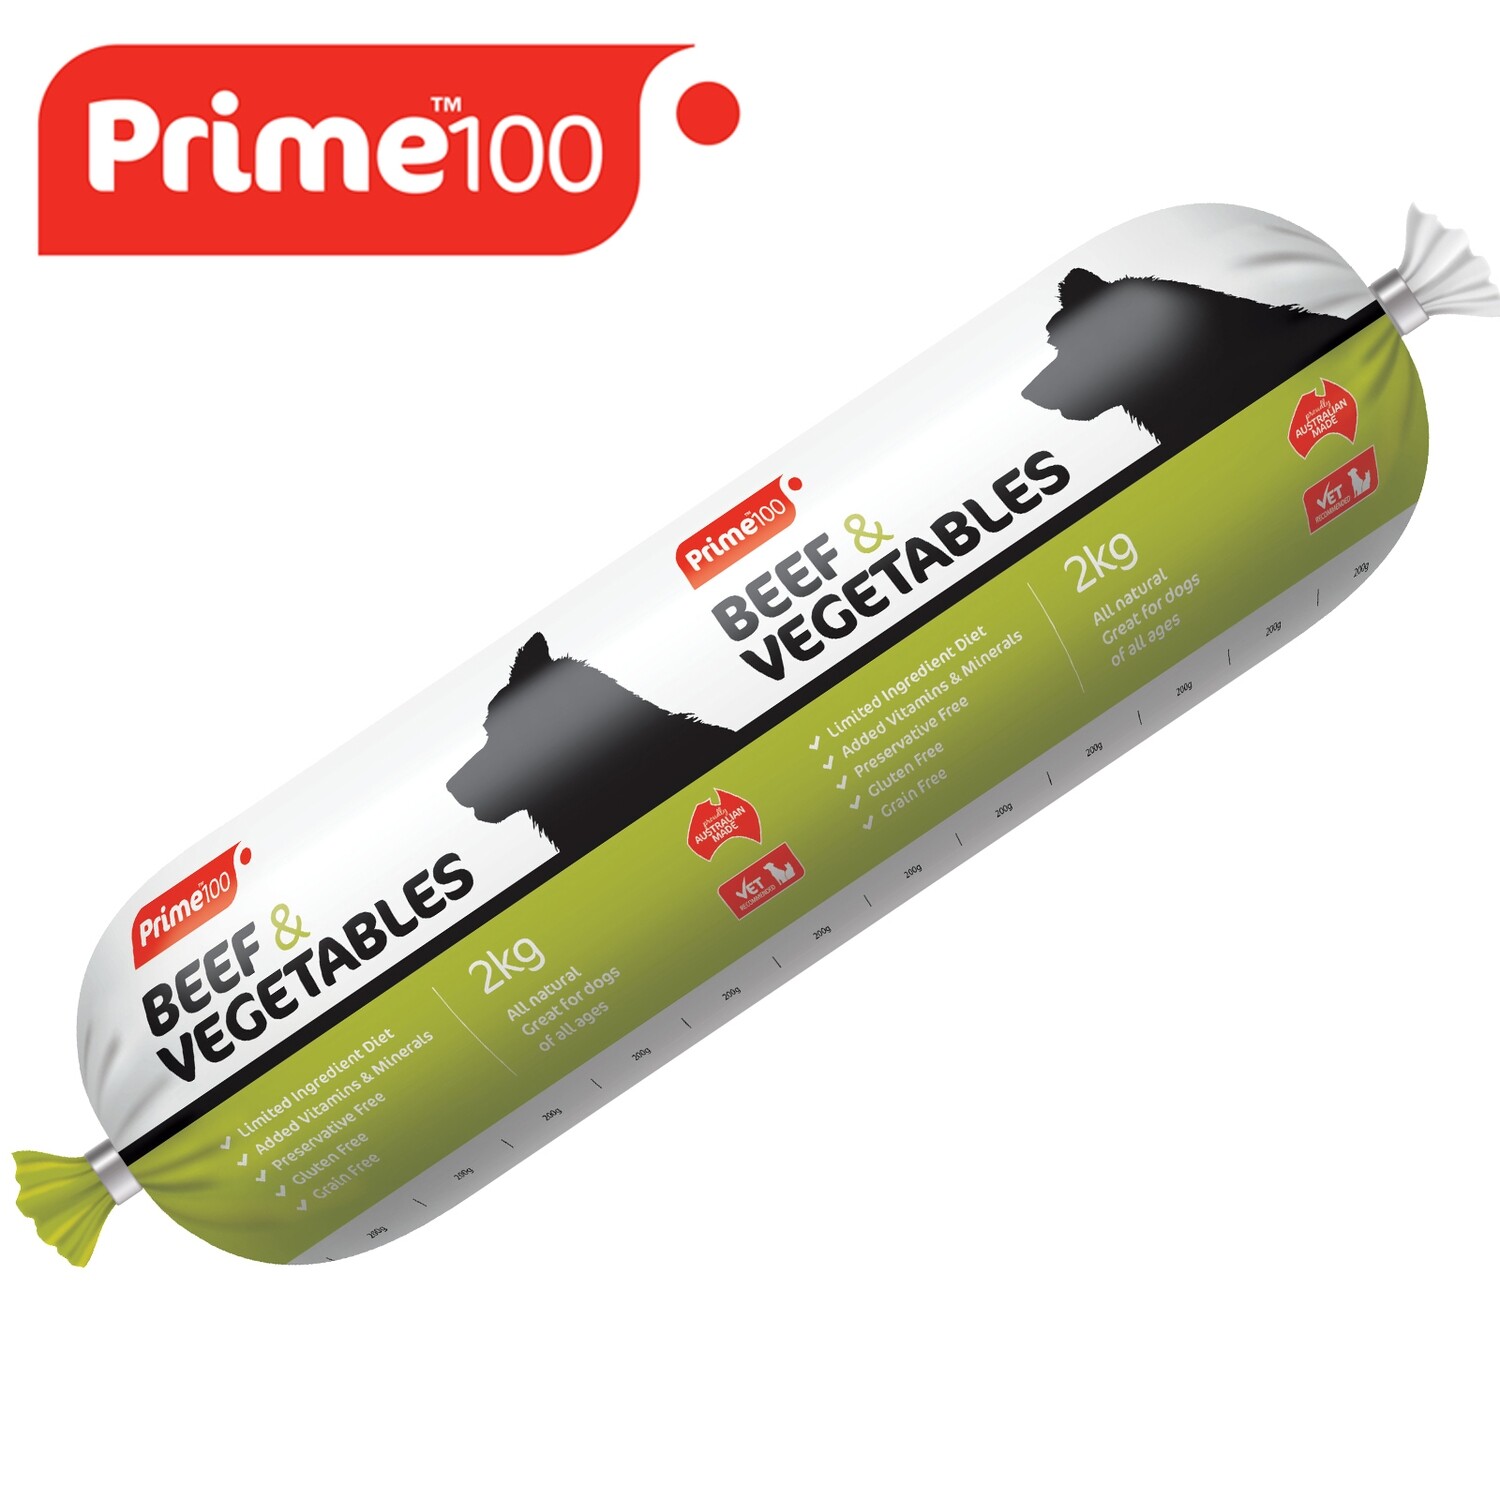 Prime 100 Beef and Vegetables, 2 Kgs.